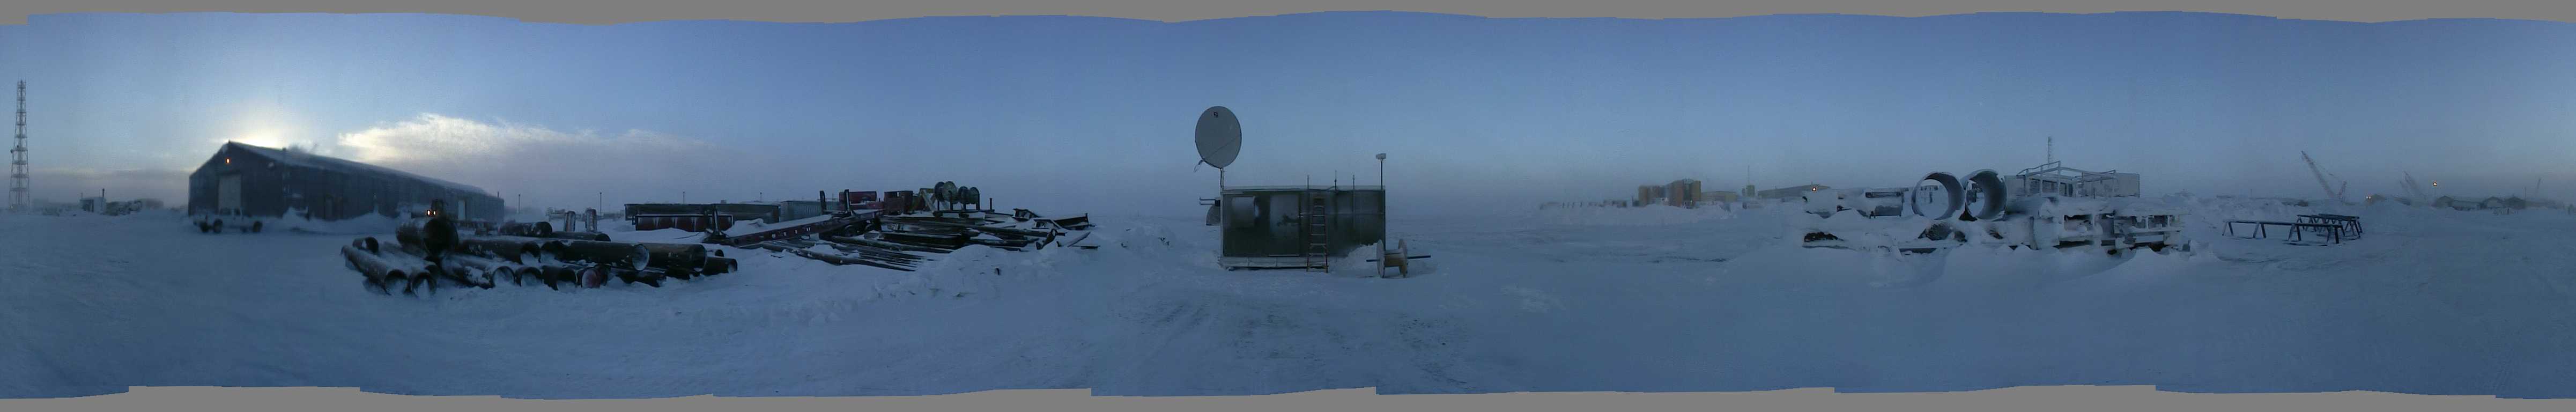 Panorama of the deployment site at Prudhoe Bay, Alaska